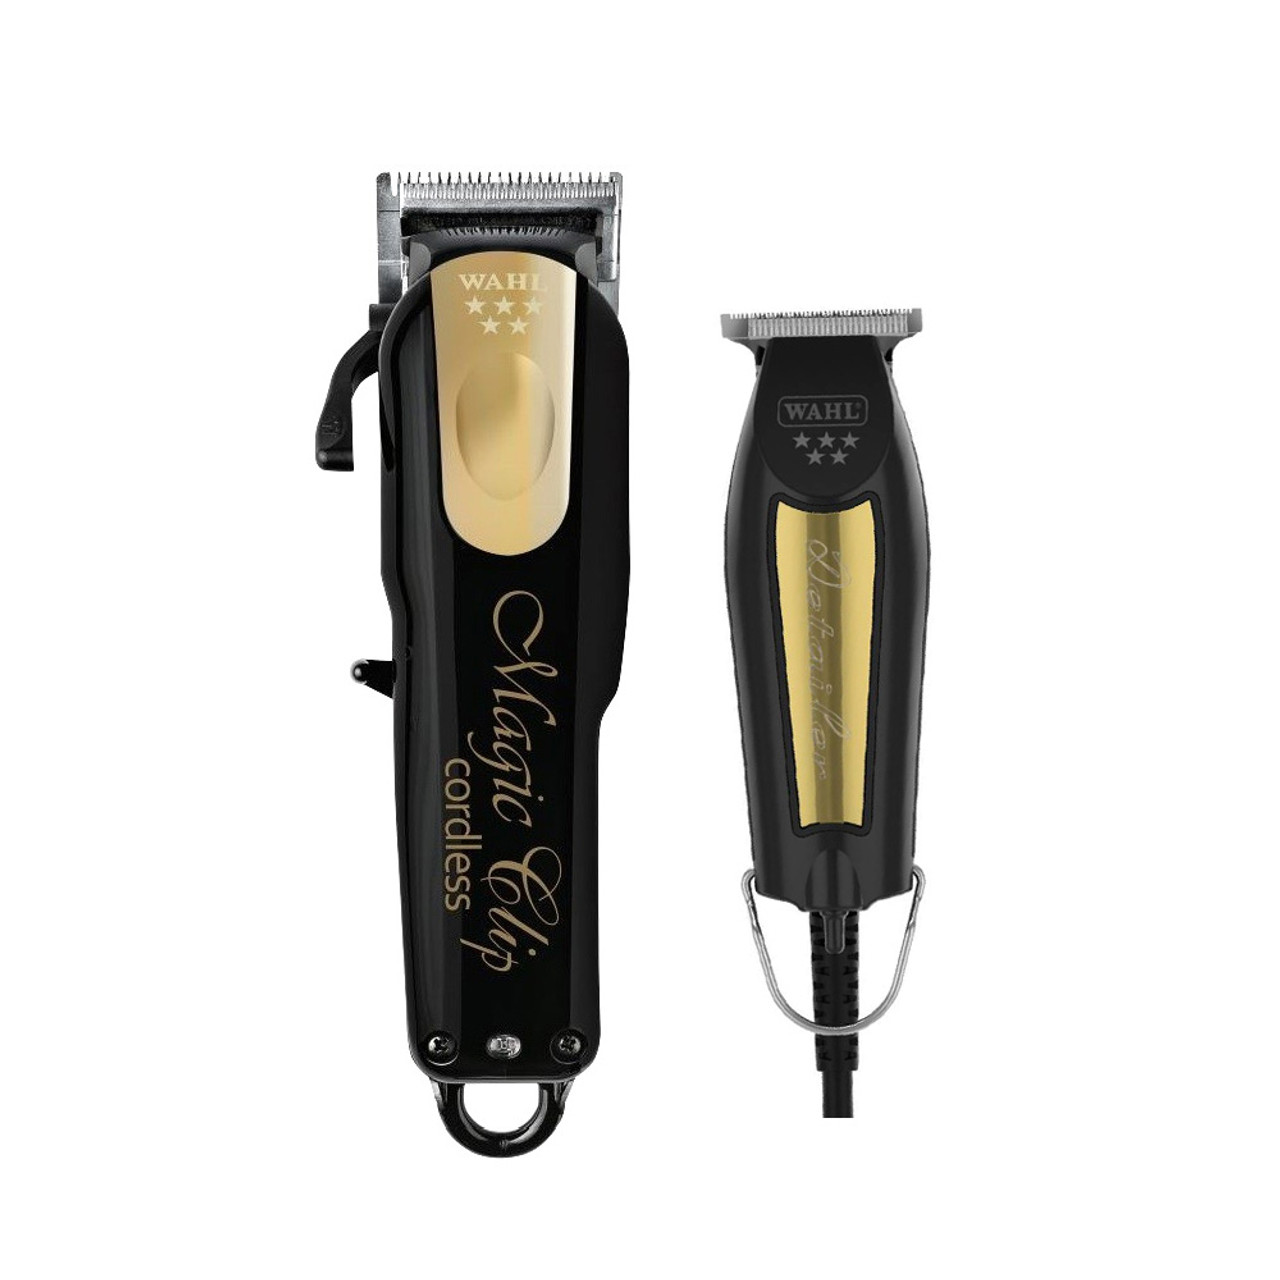 cordless magic clip by wahl